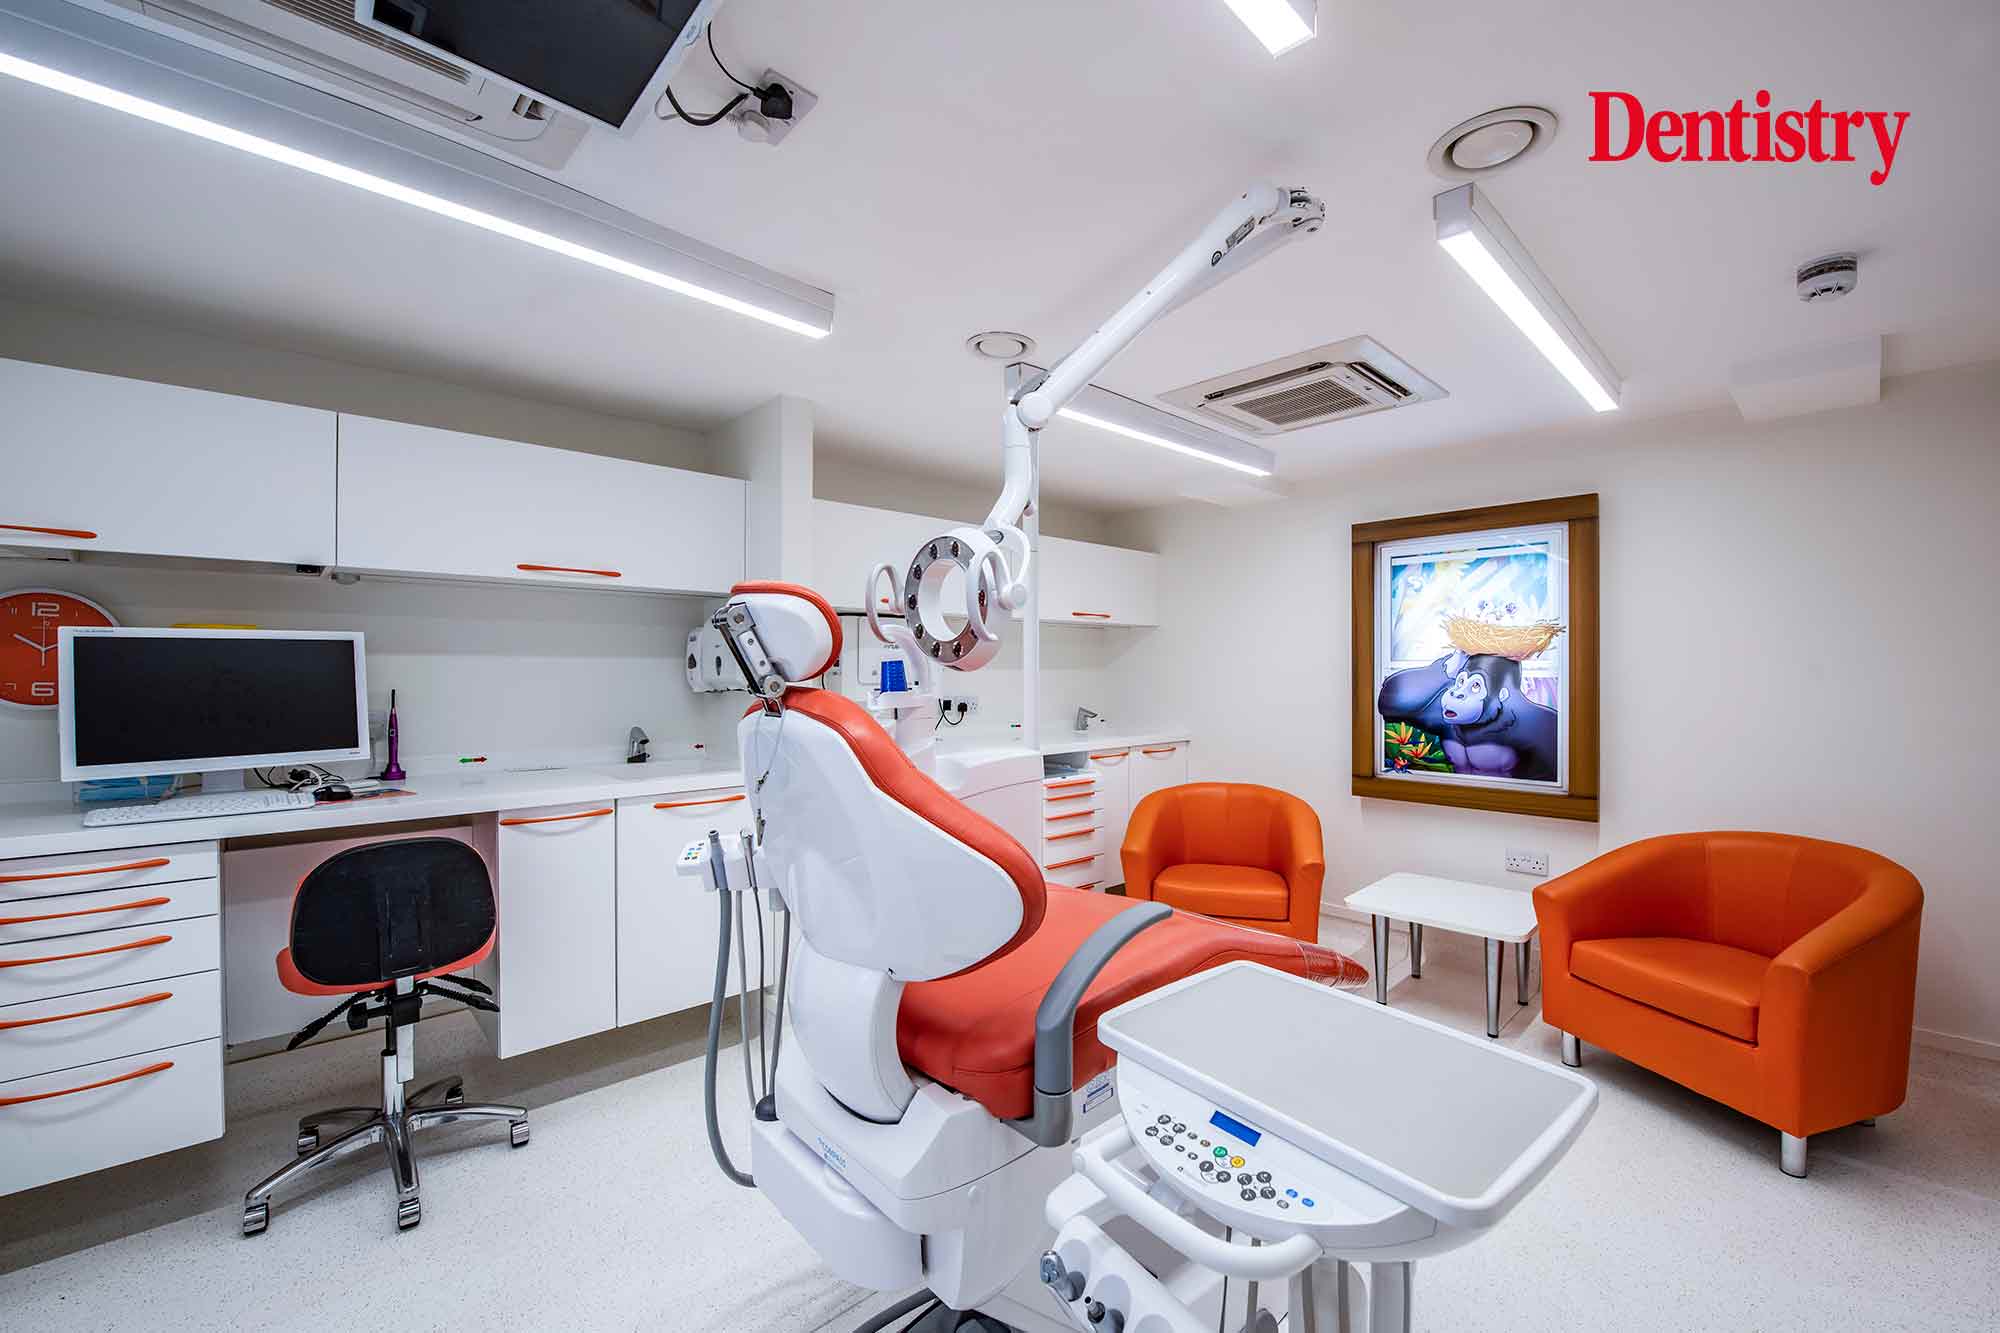 West End investment hits the market - Dentistry